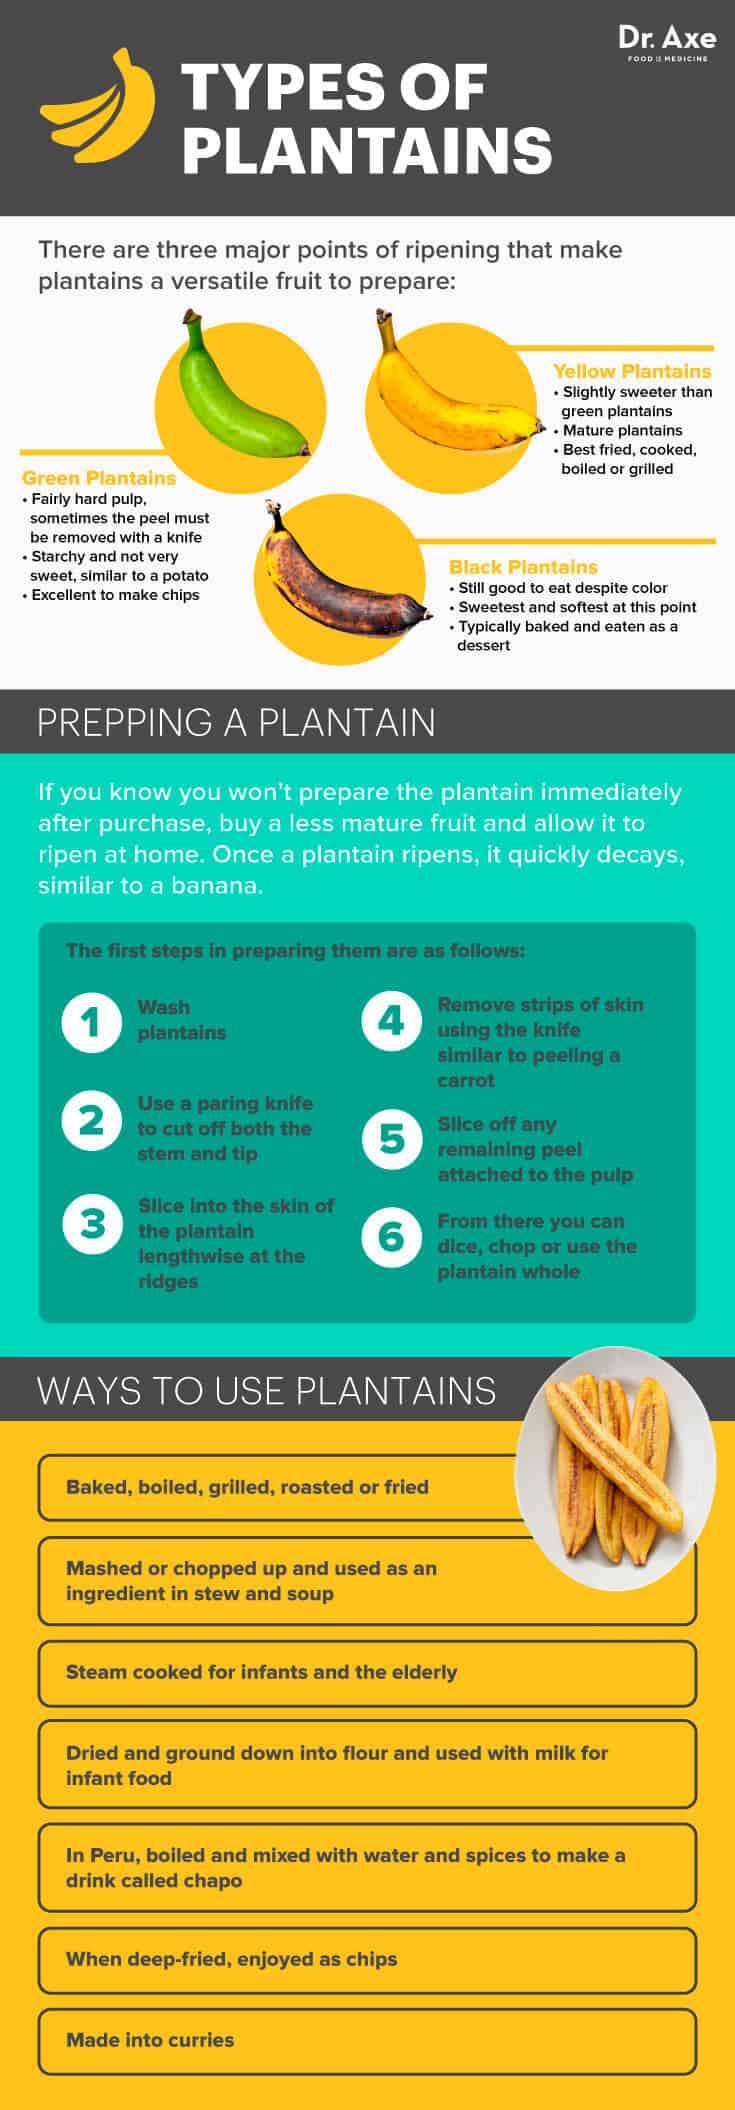 Types of plantains - Dr. Axe